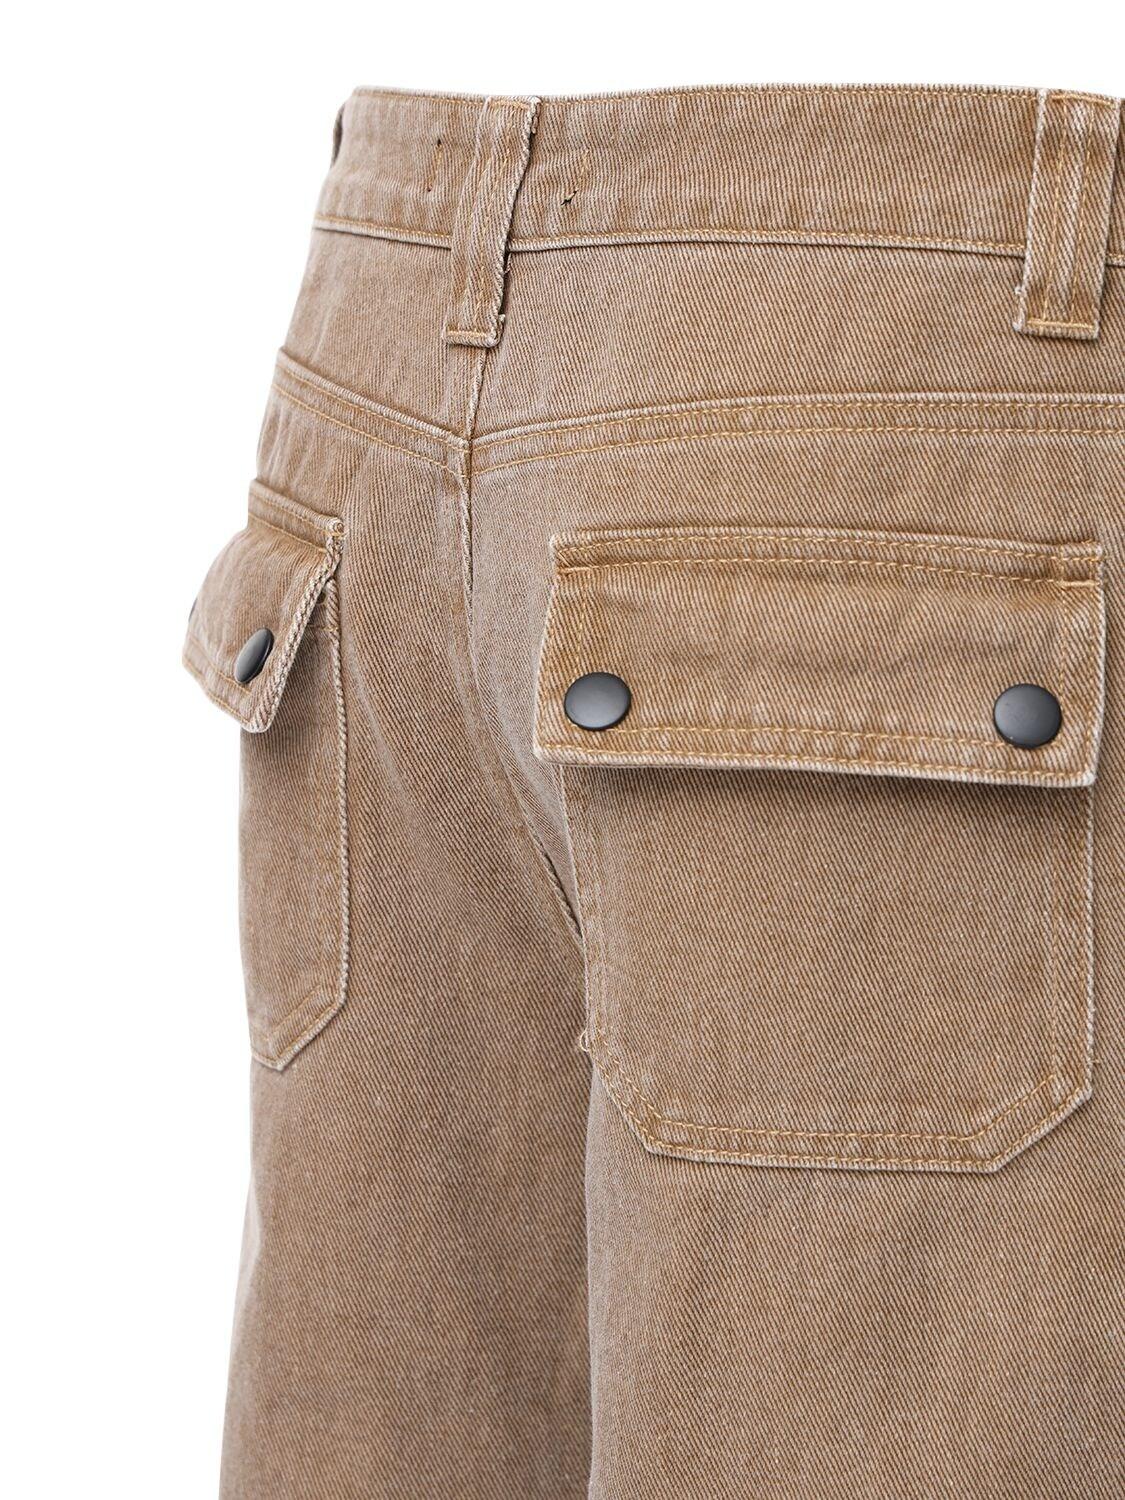 Jaded London Cotton Twill Cargo Pants in Beige (Natural) for Men 